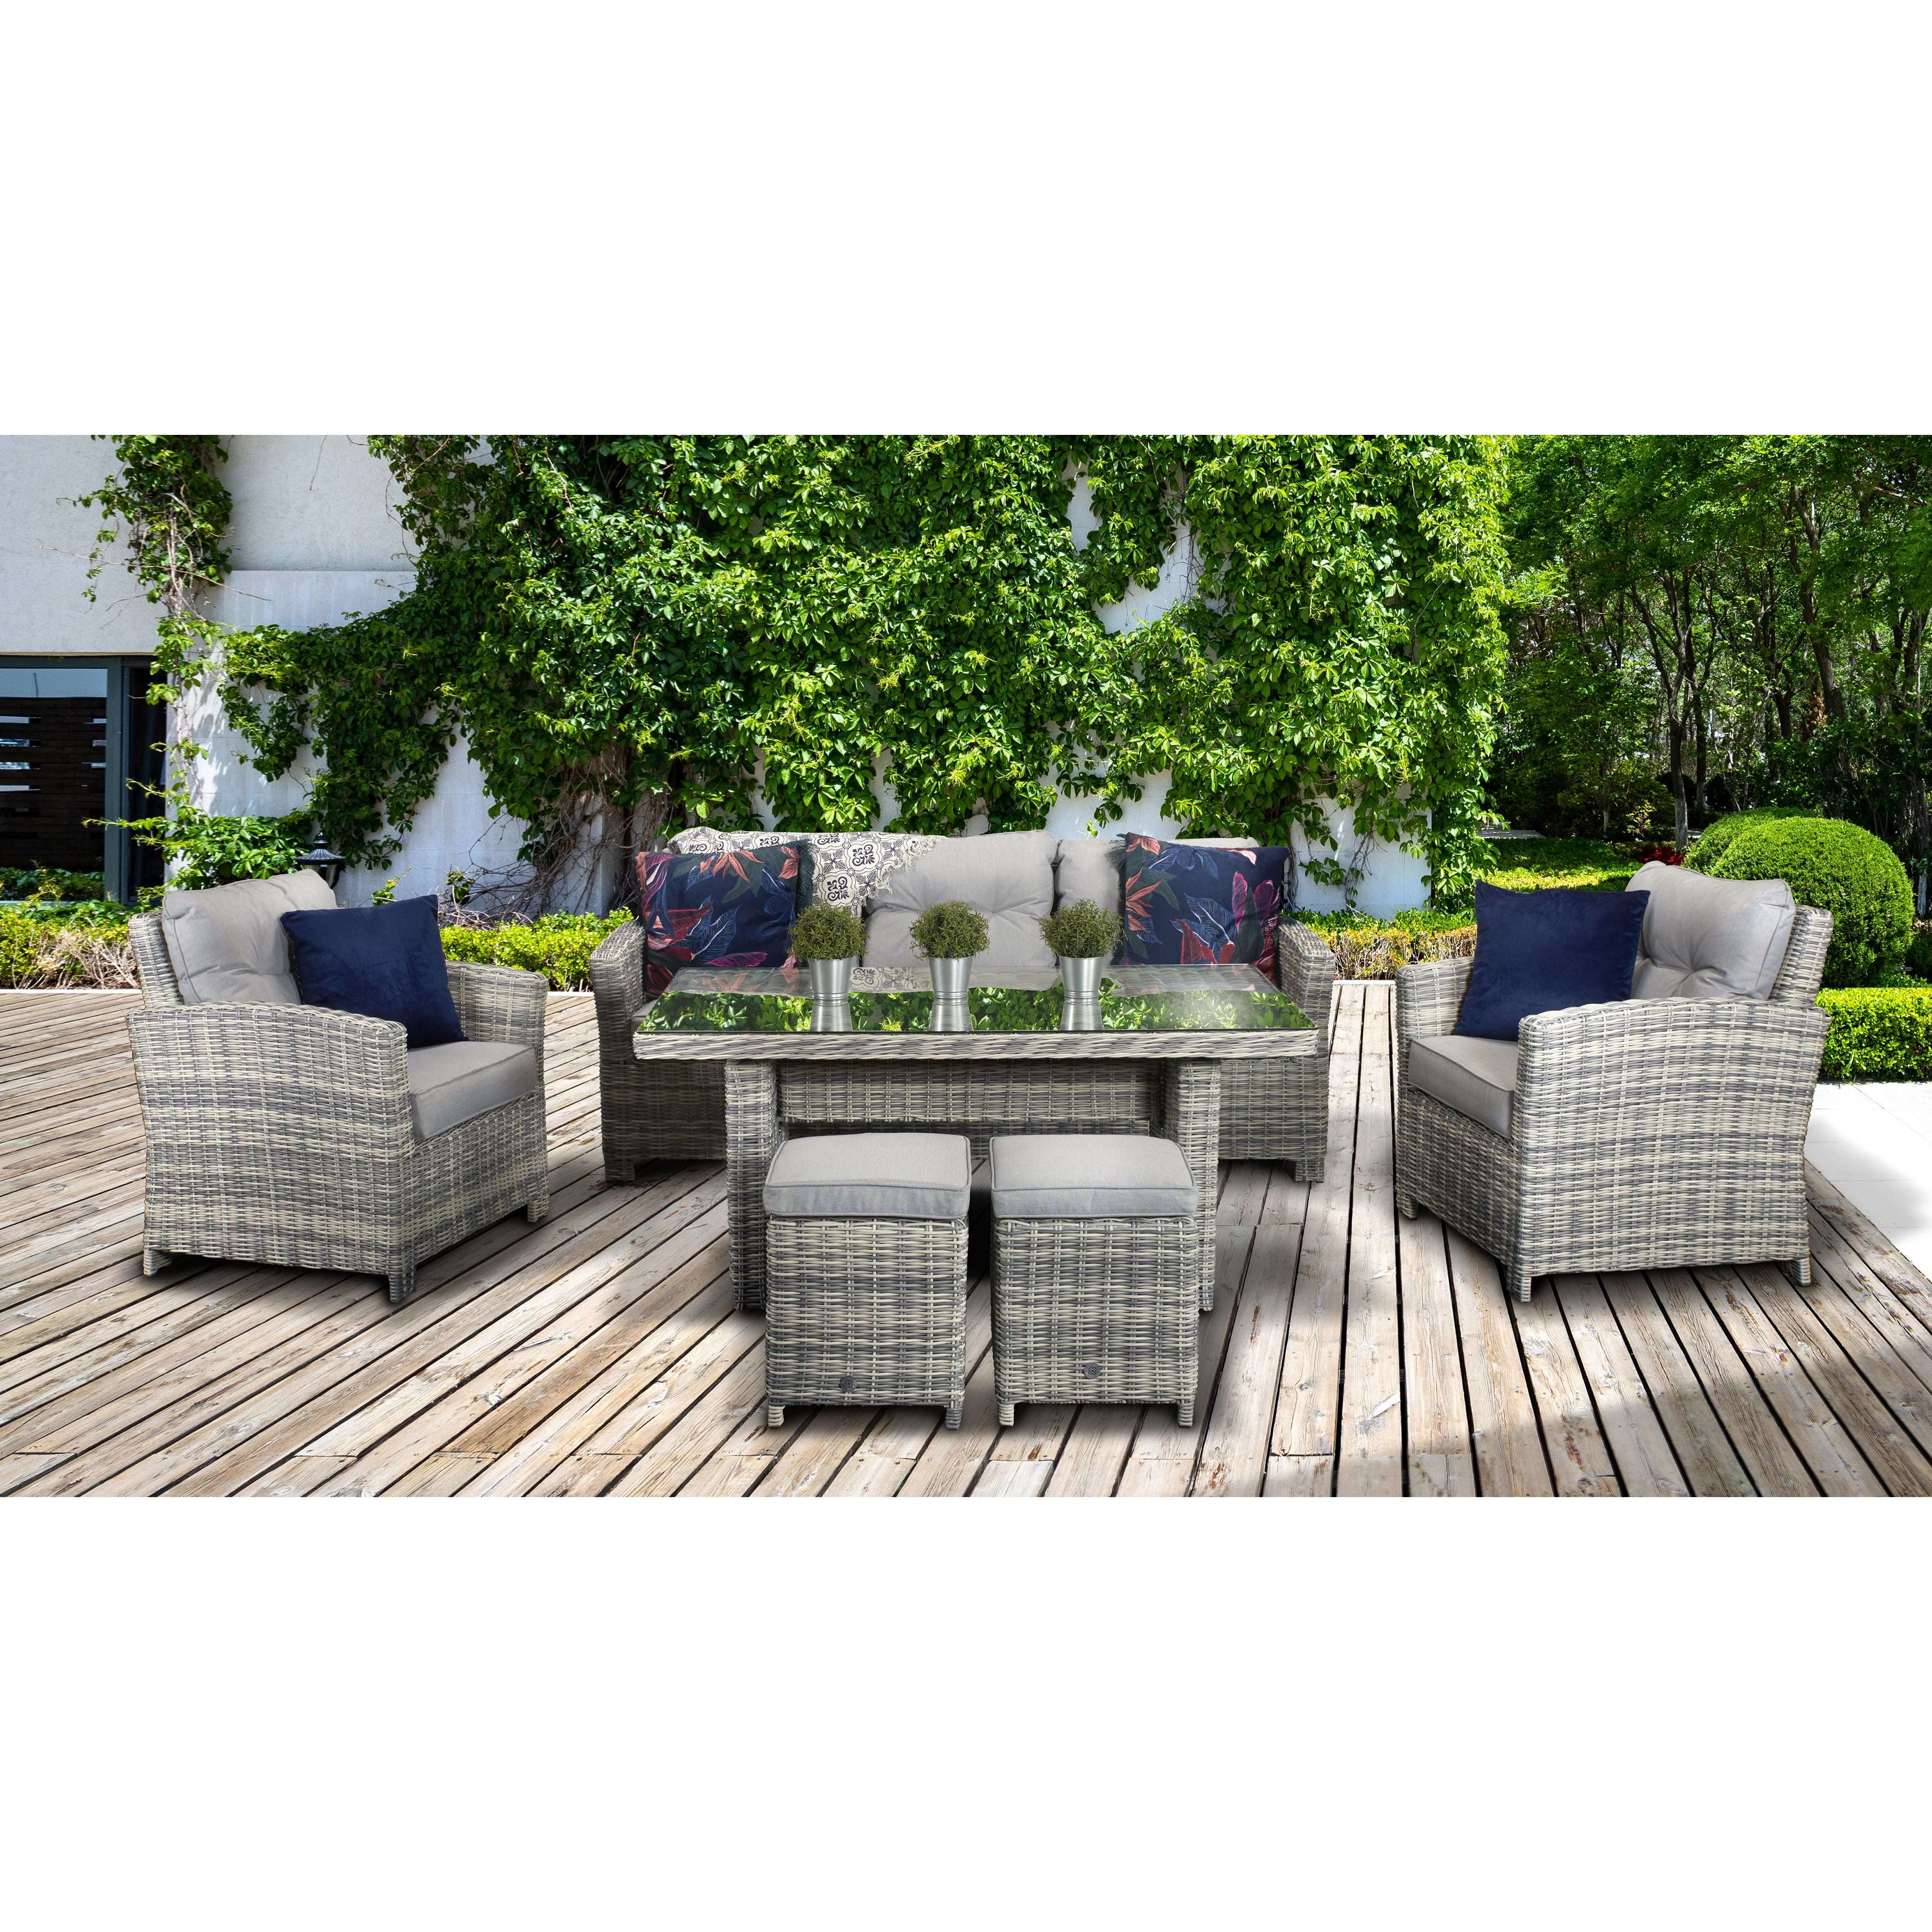 Exceptional Garden:Signature Weave Amy Sofa Dining Set